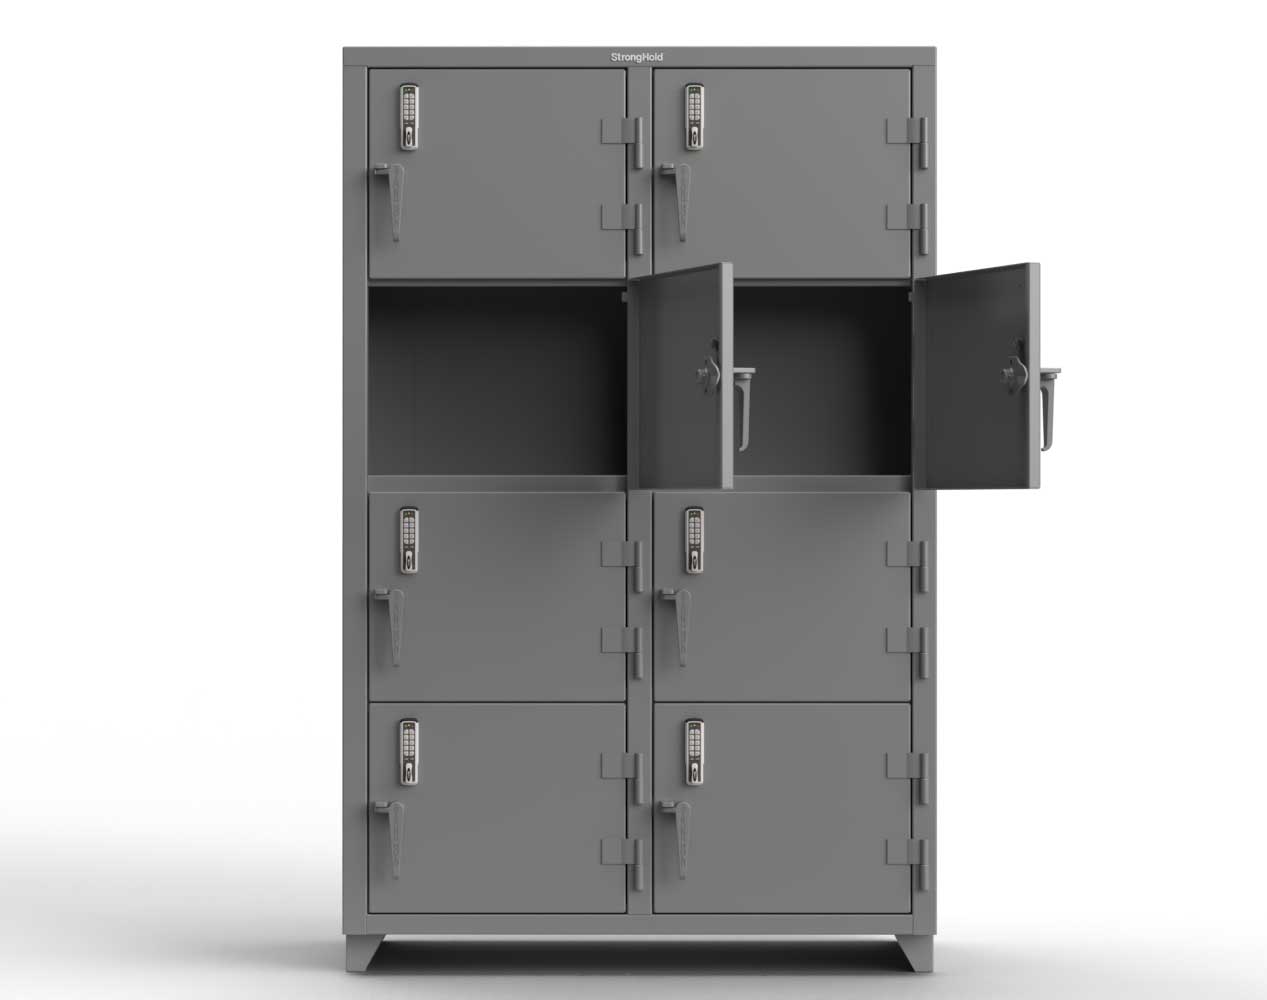 Extra Heavy Duty 14 GA 4-Tier Locker with Keyless Entry Lock, 8 Compartments - 48 in. W x 24 in. D x 75 in. H